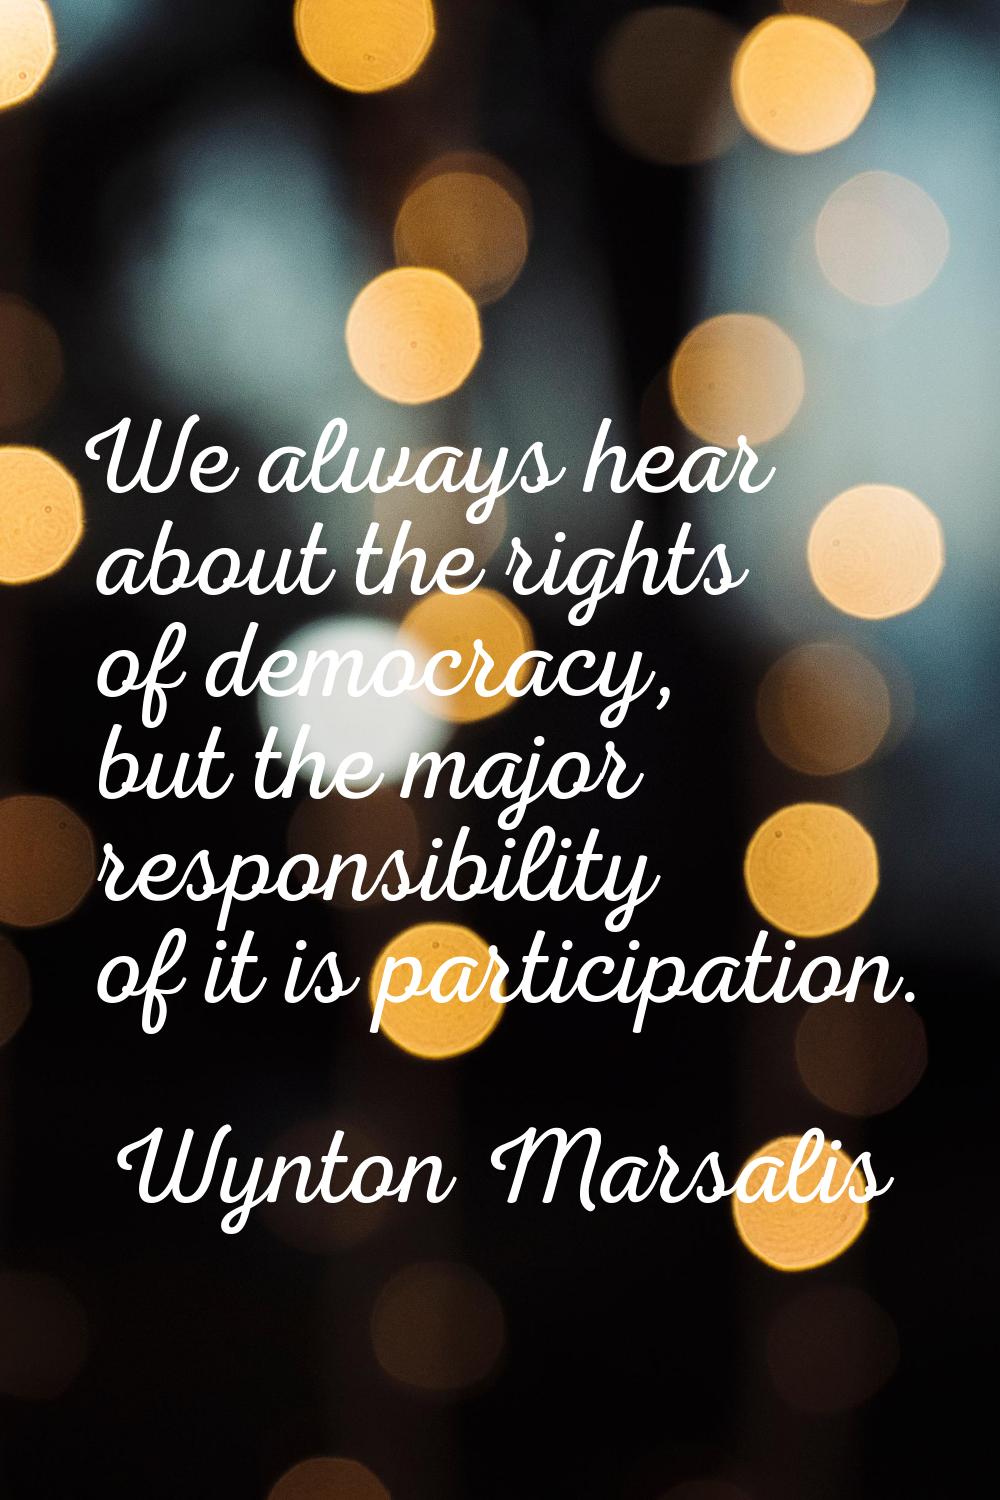 We always hear about the rights of democracy, but the major responsibility of it is participation.